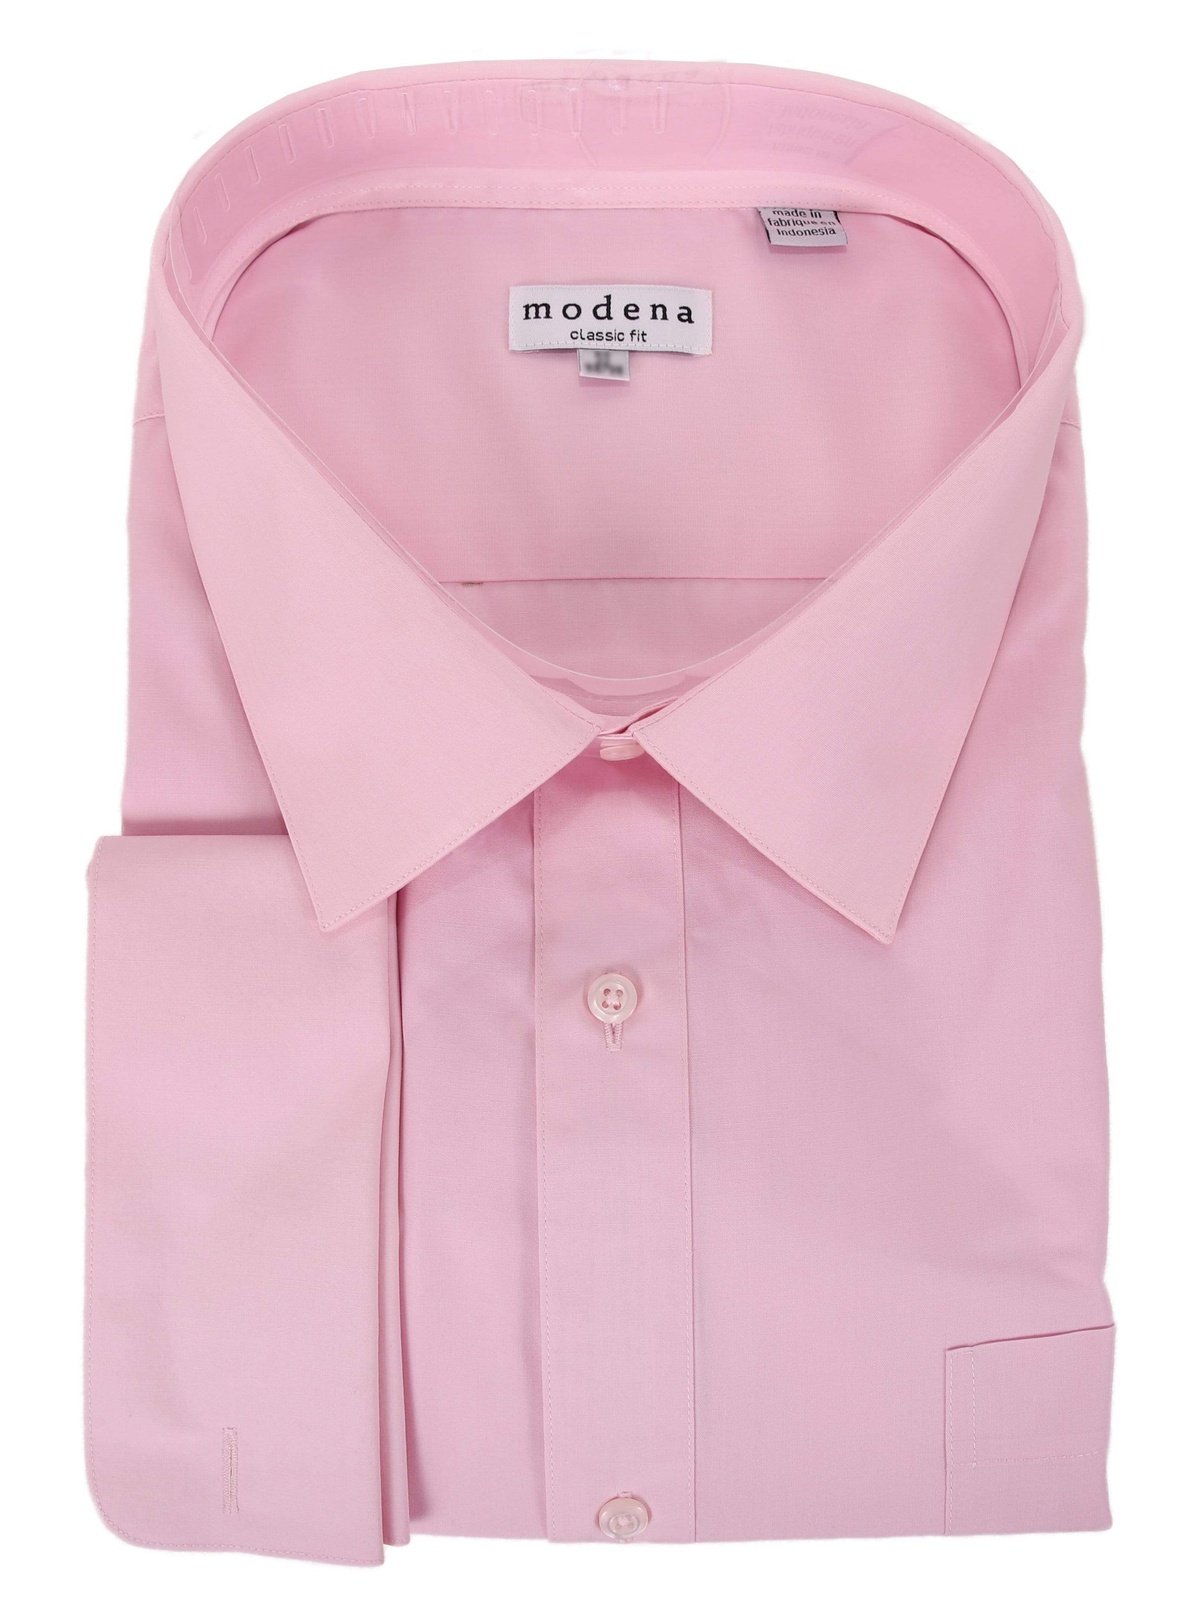 Brand M SHIRTS 16 / 32-33 Mens Solid Pink Regular Fit Spread Collar French Cuff Dress Shirt